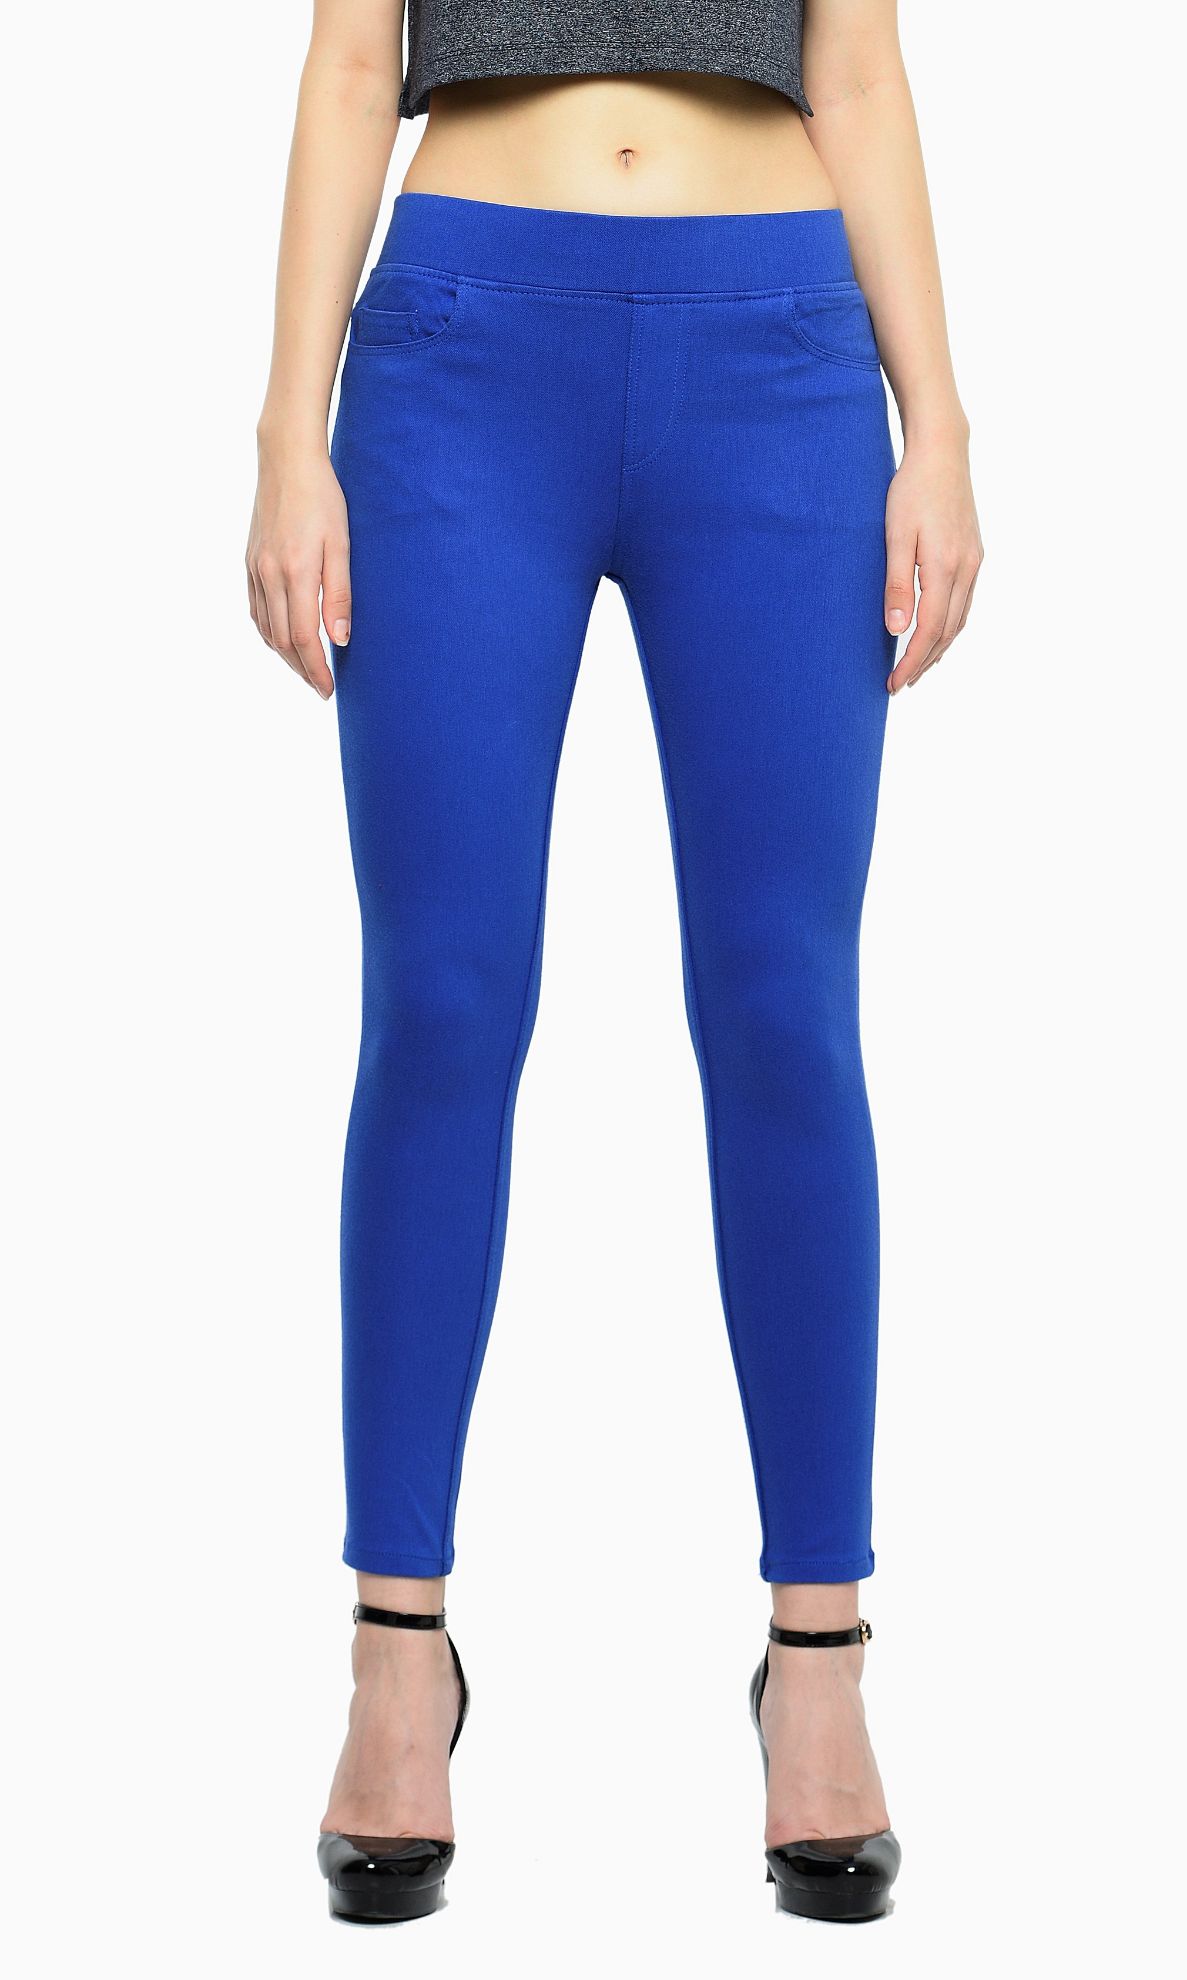 Frenchtrendz  Buy Frenchtrendz Cotton Viscose Spandex Royal Blue Jeggings  Online